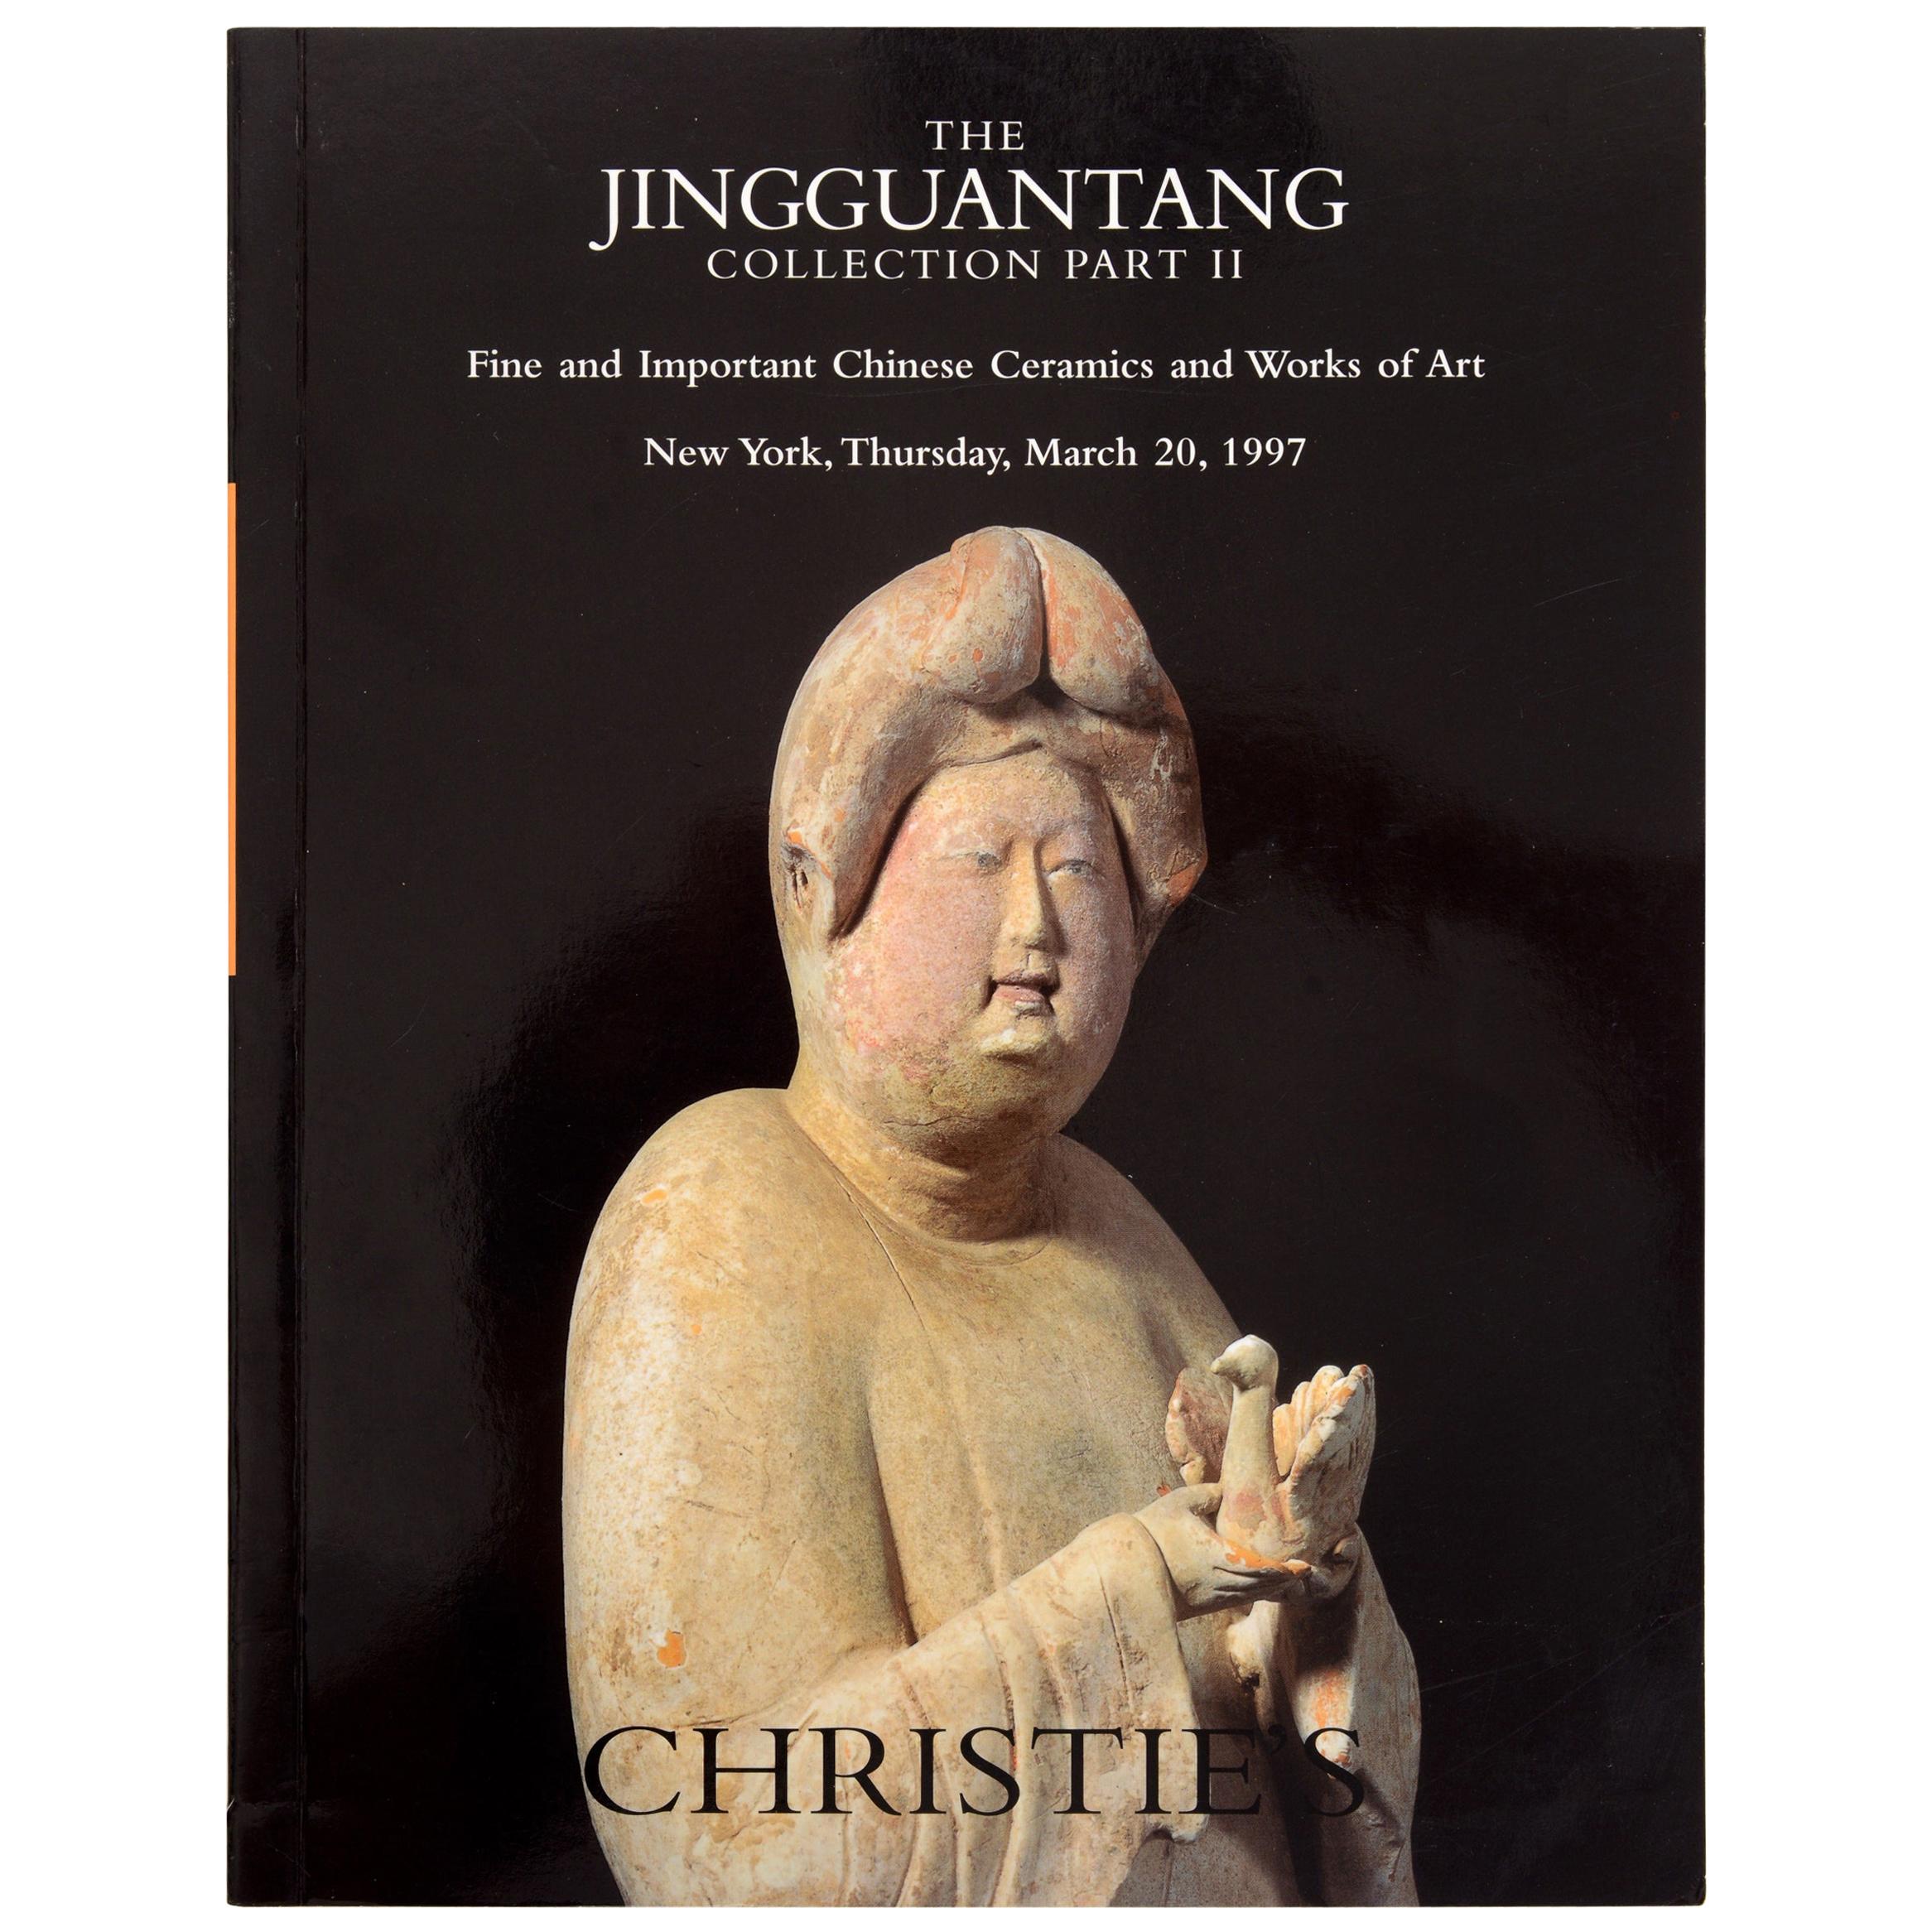 Christie's: Jingguantang Collection Part II Important Chinese Ceramics